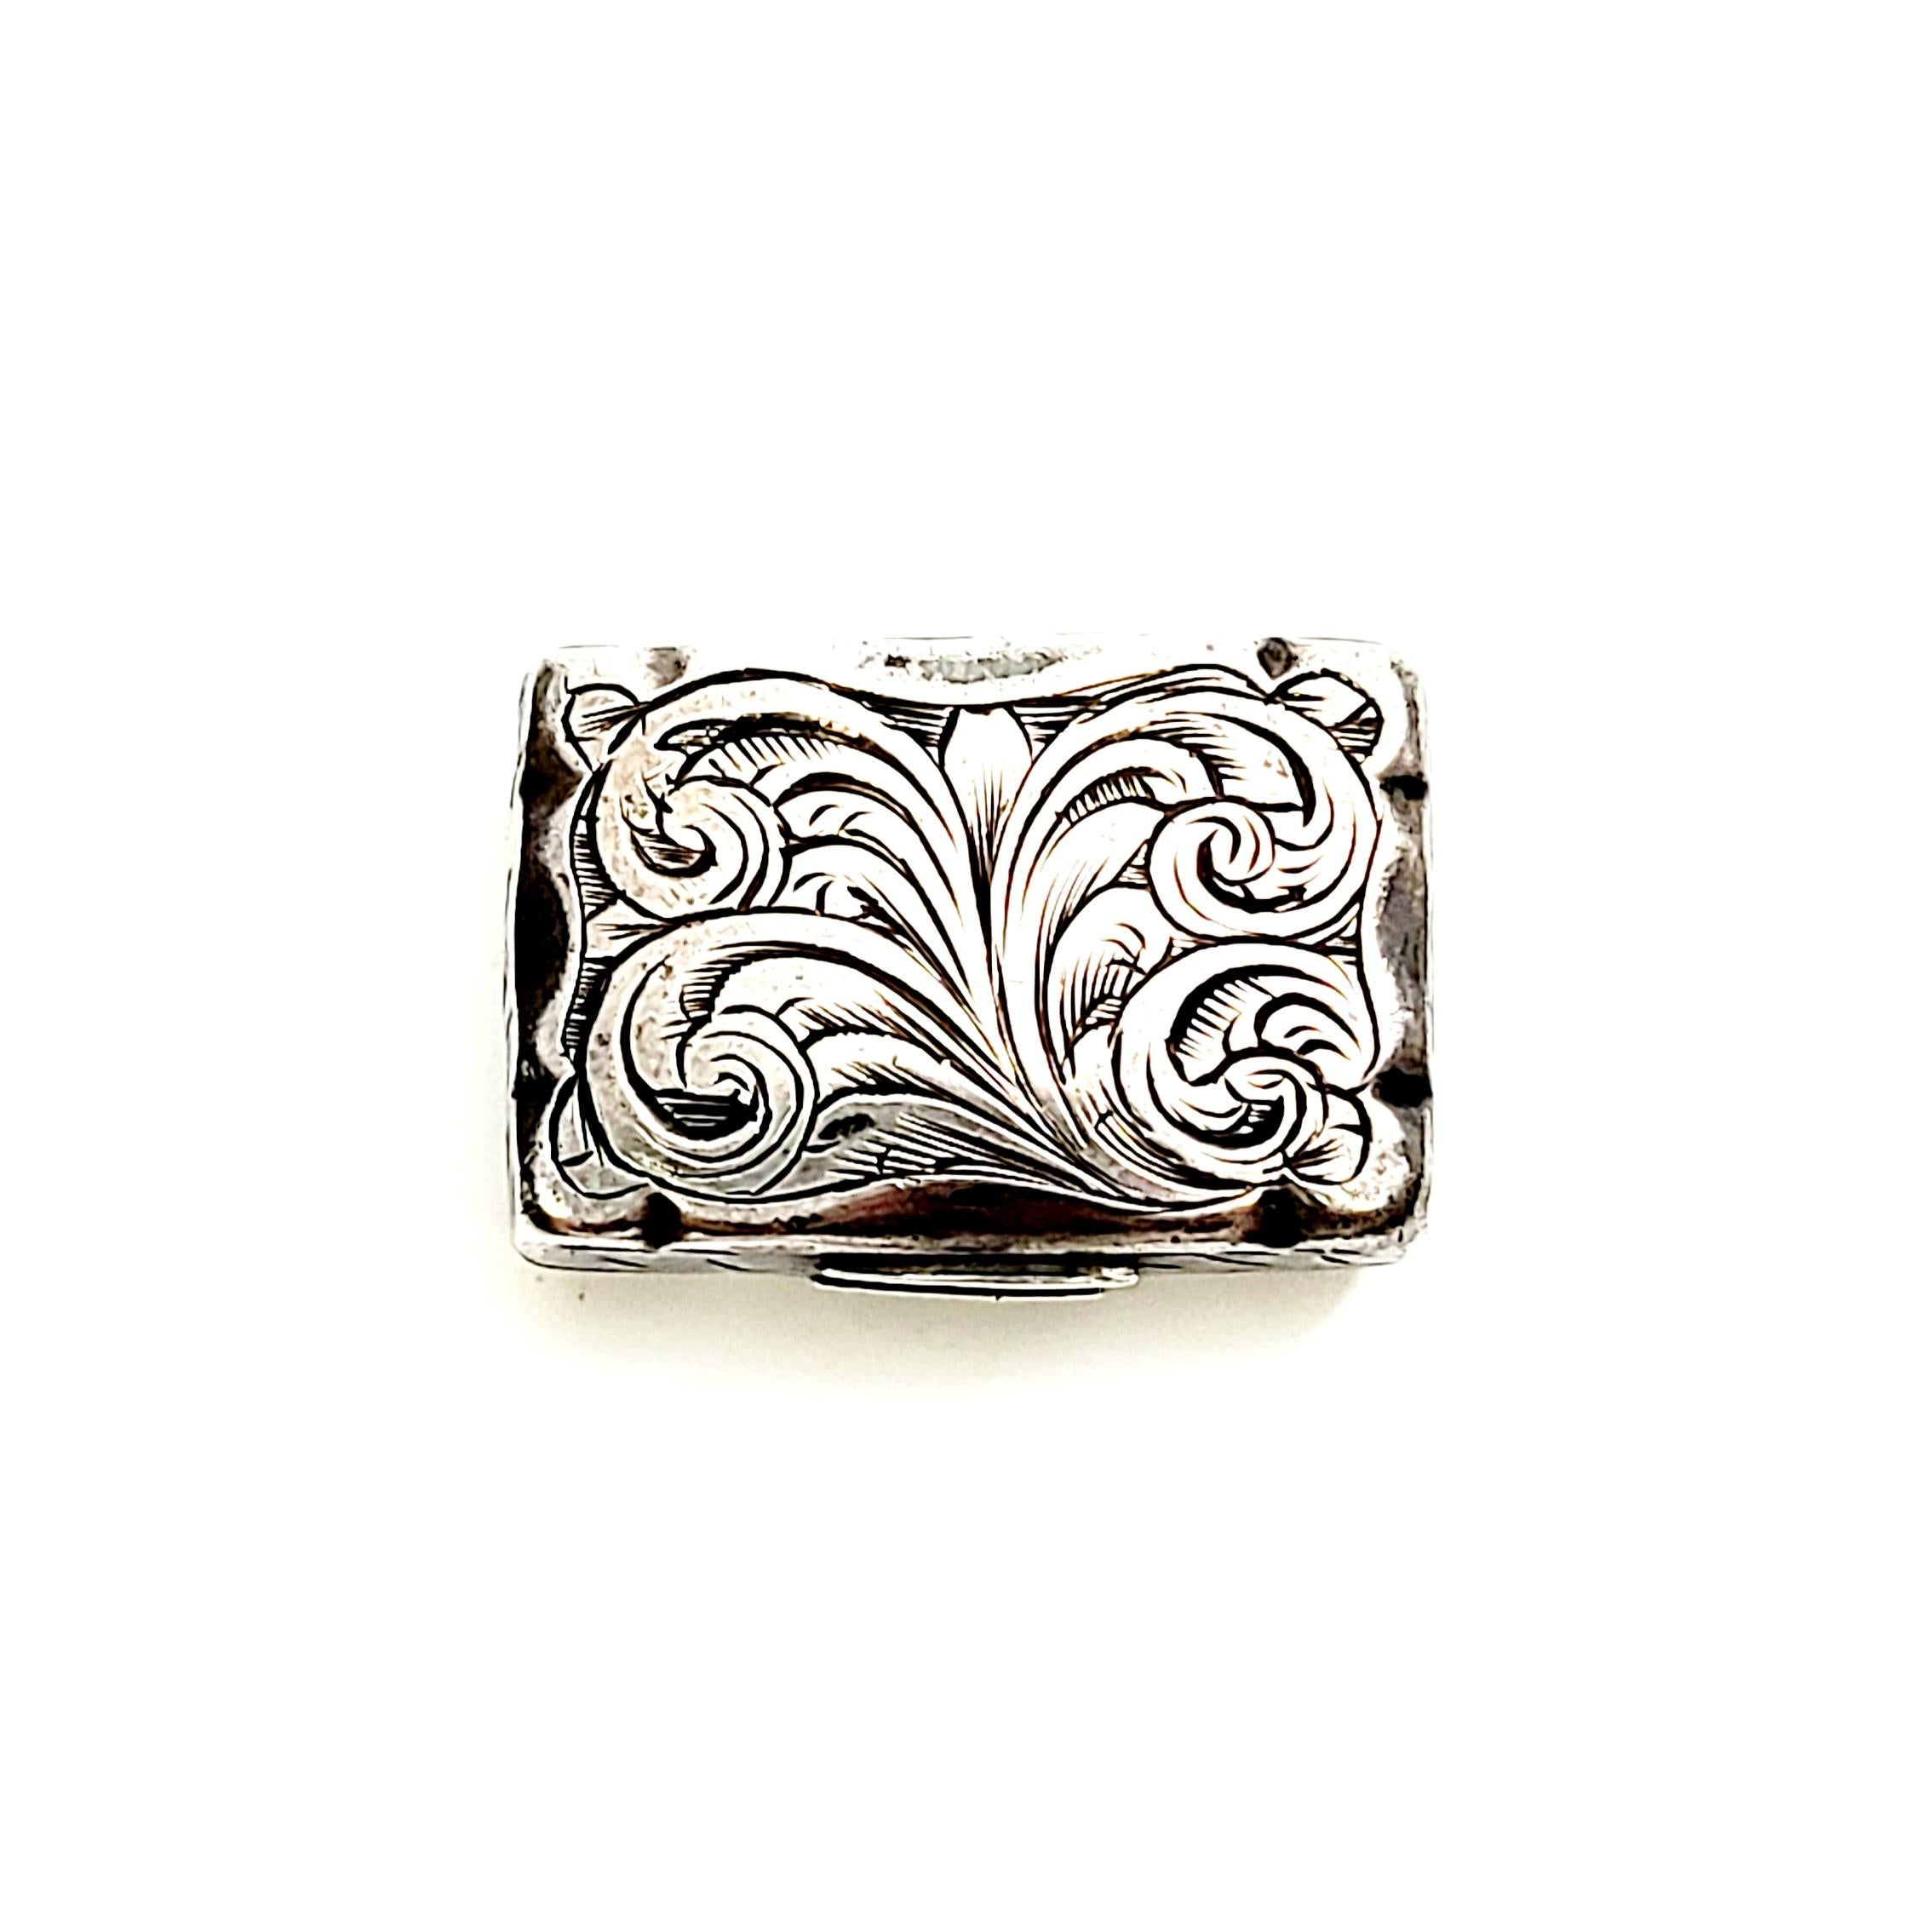 Antique English sterling silver vinaigrette box by Fredrick Marson, circa 1856.

This is a beautiful example of the small decorative boxes that were used to carry perfume and scents when traveling. The scent would be soaked into a sponge that